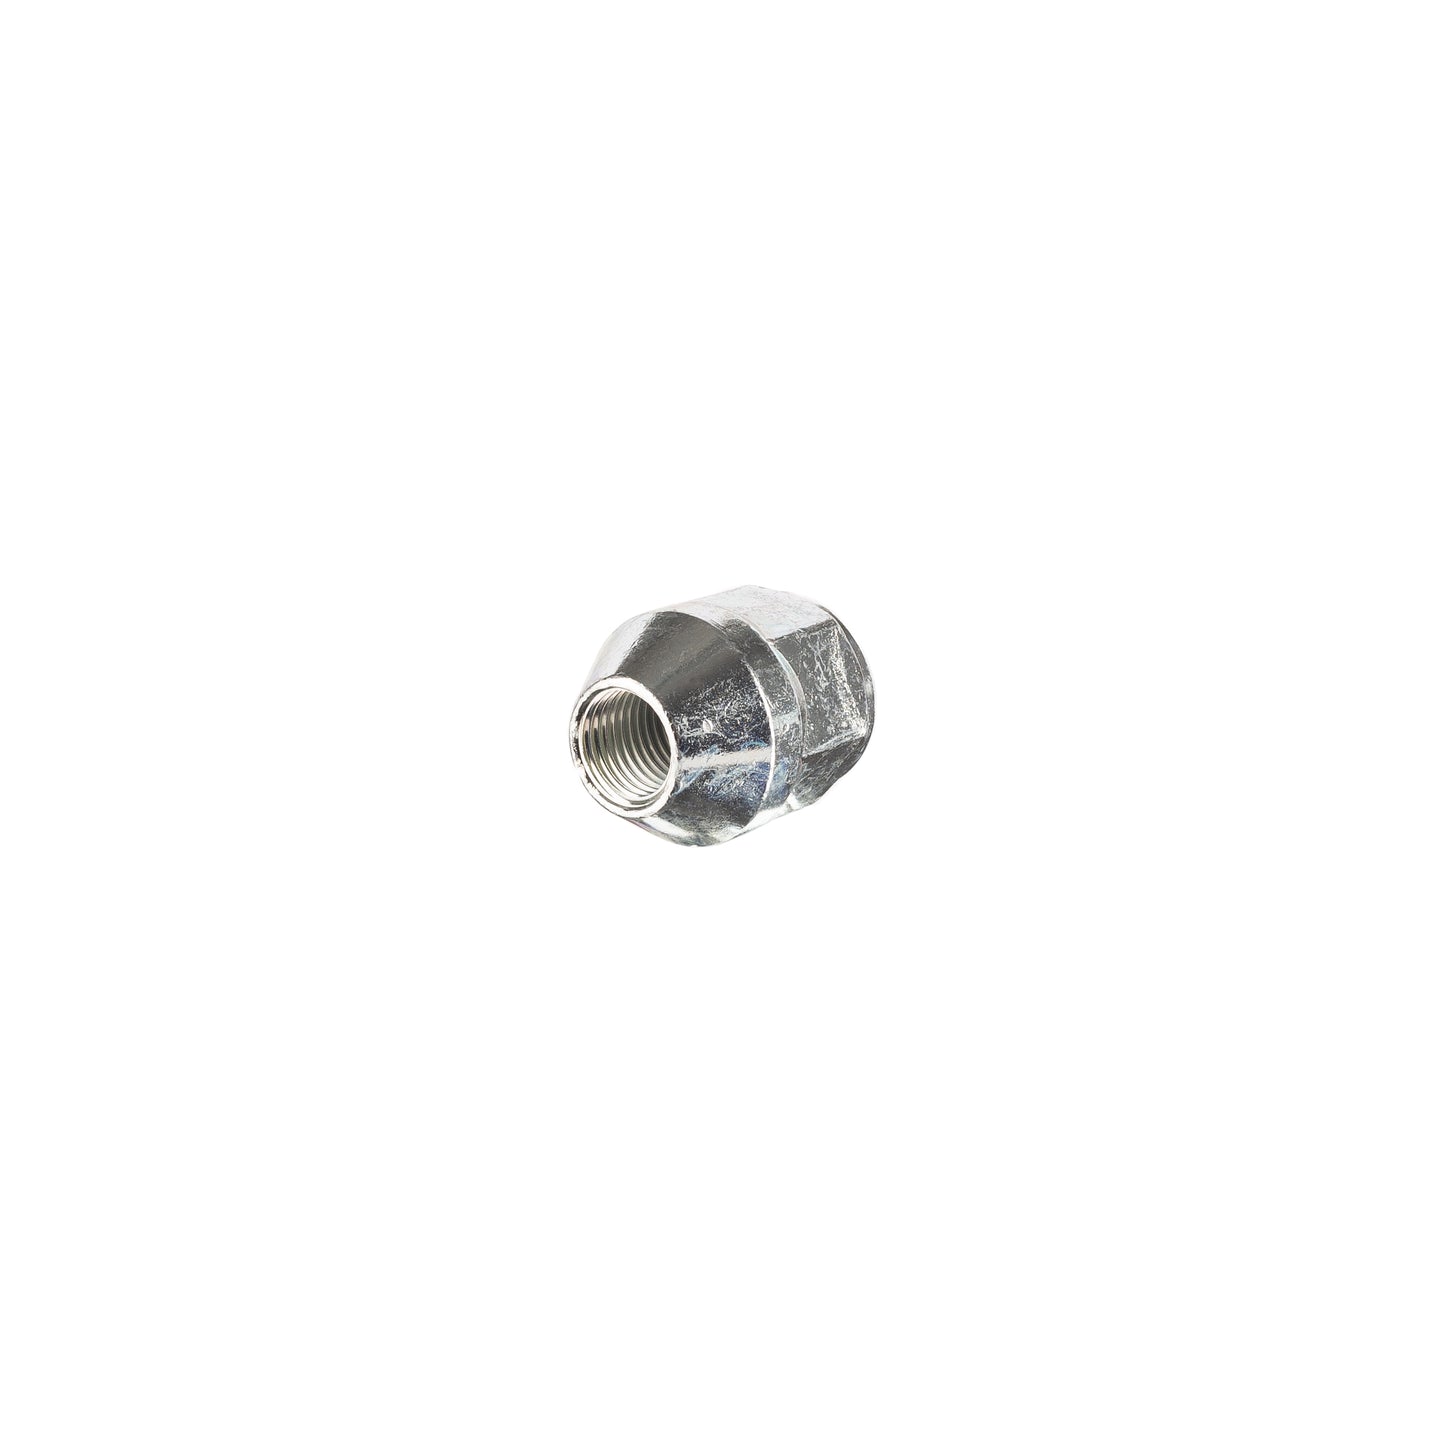 Closed Nut, 60° Taper, 21 Hex, 29 Height, Galv